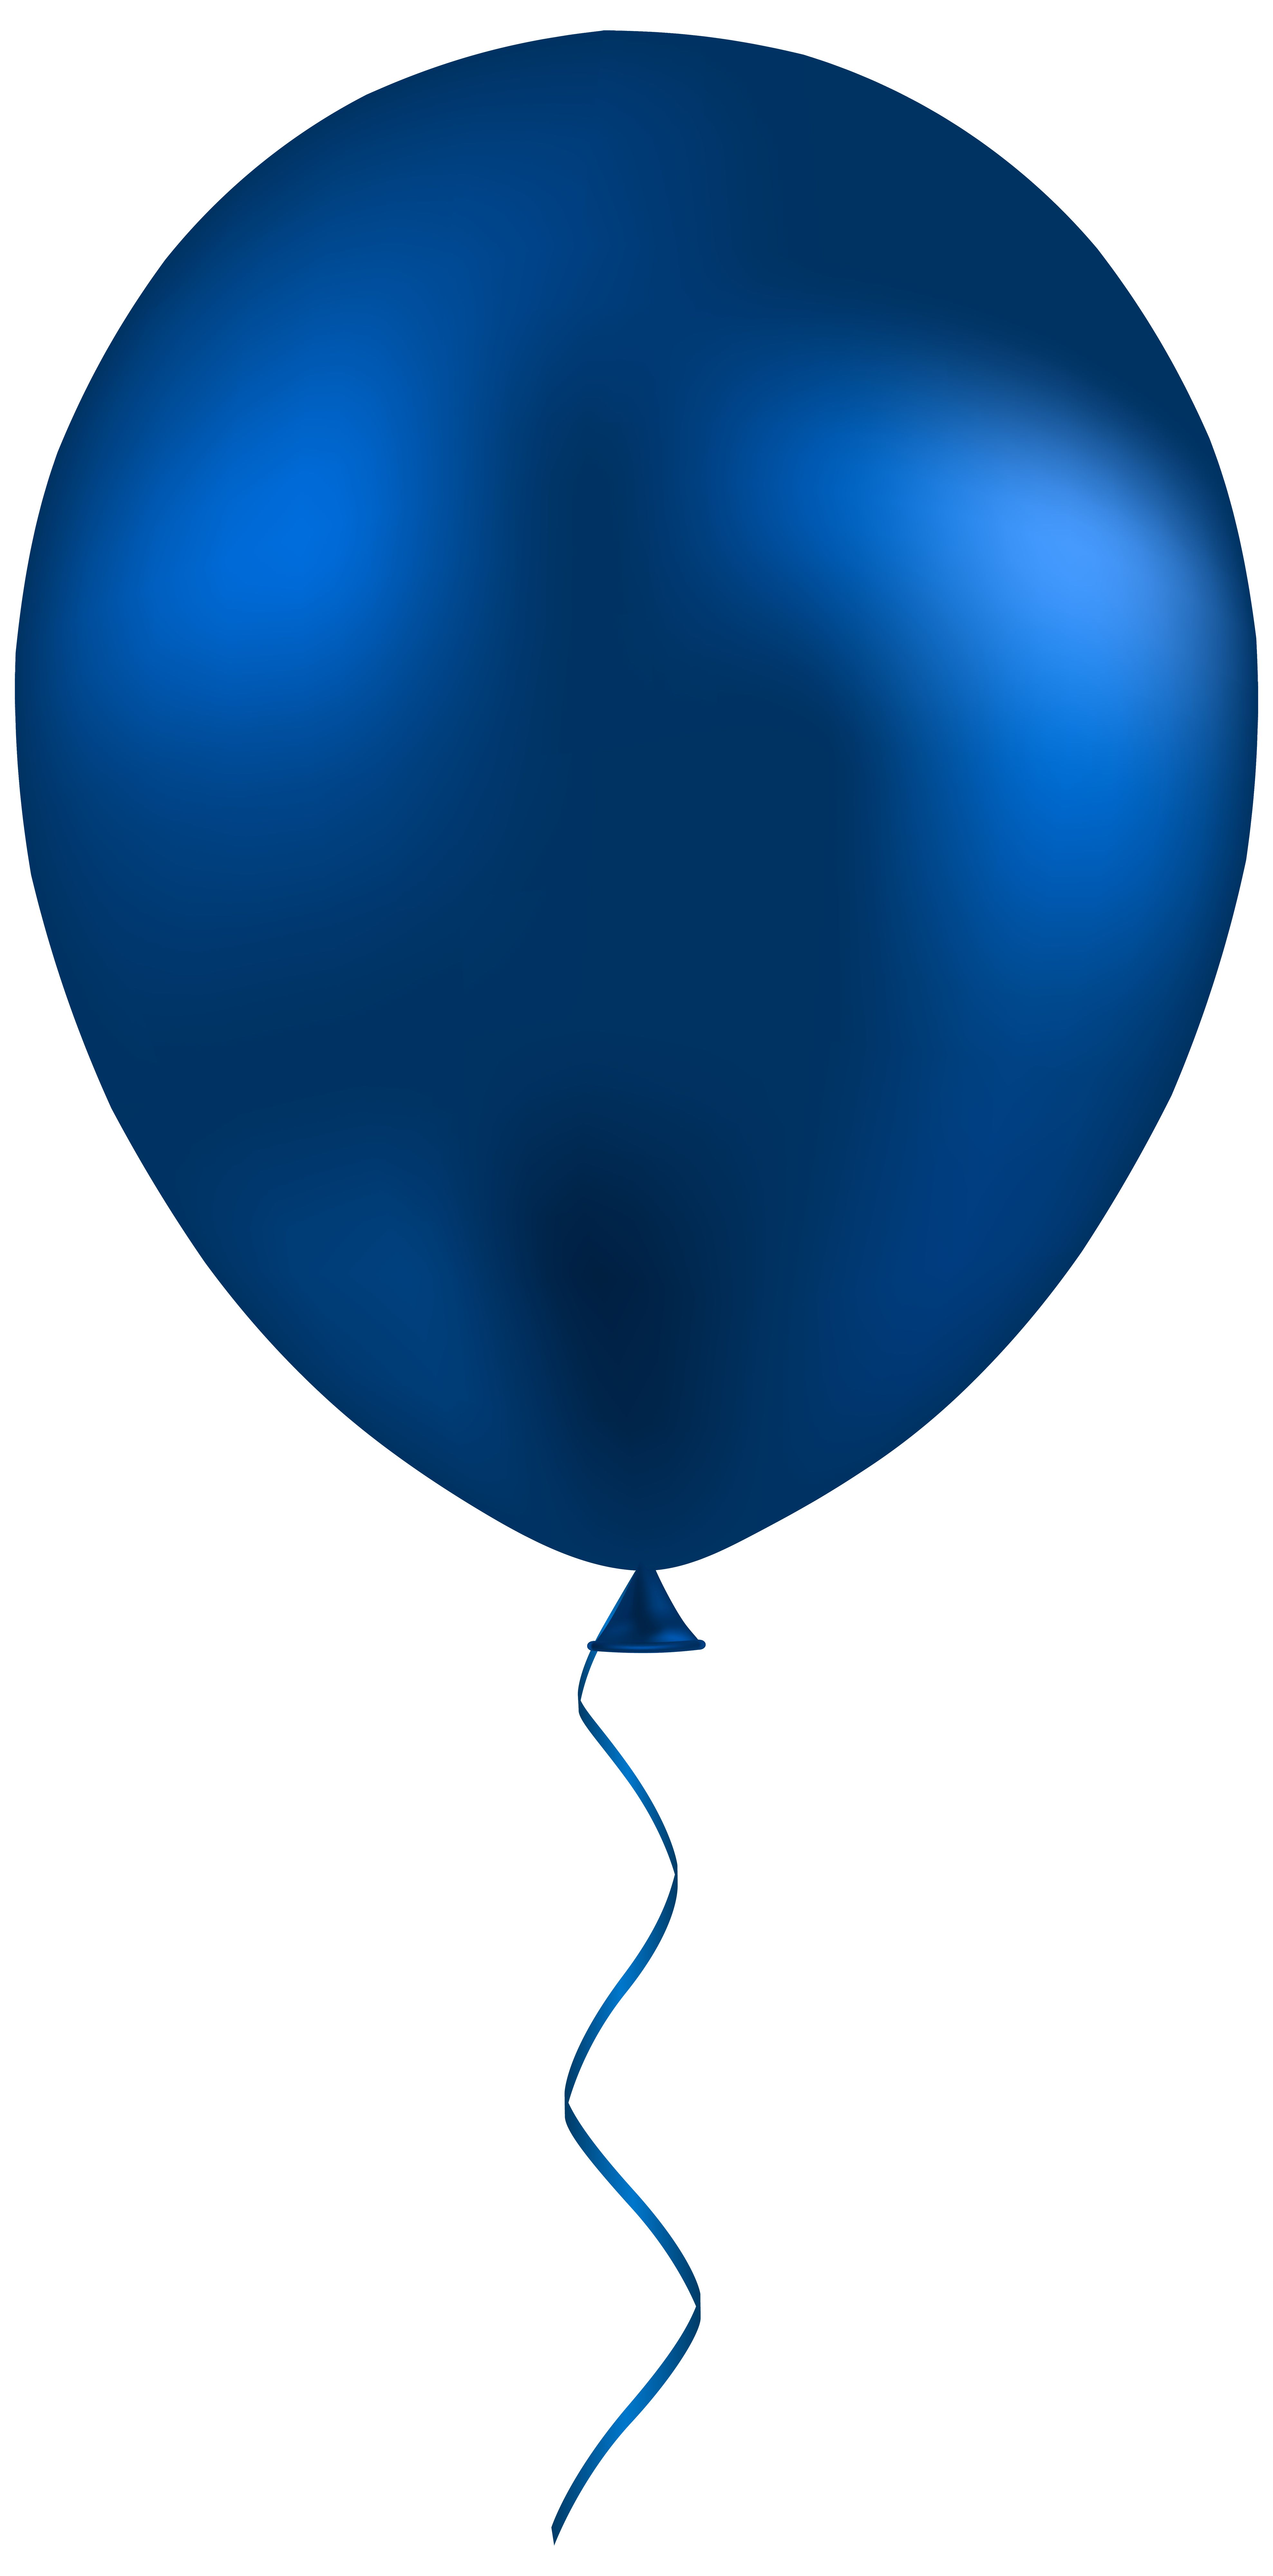 Telephone clipart ancient. Dark blue balloon png